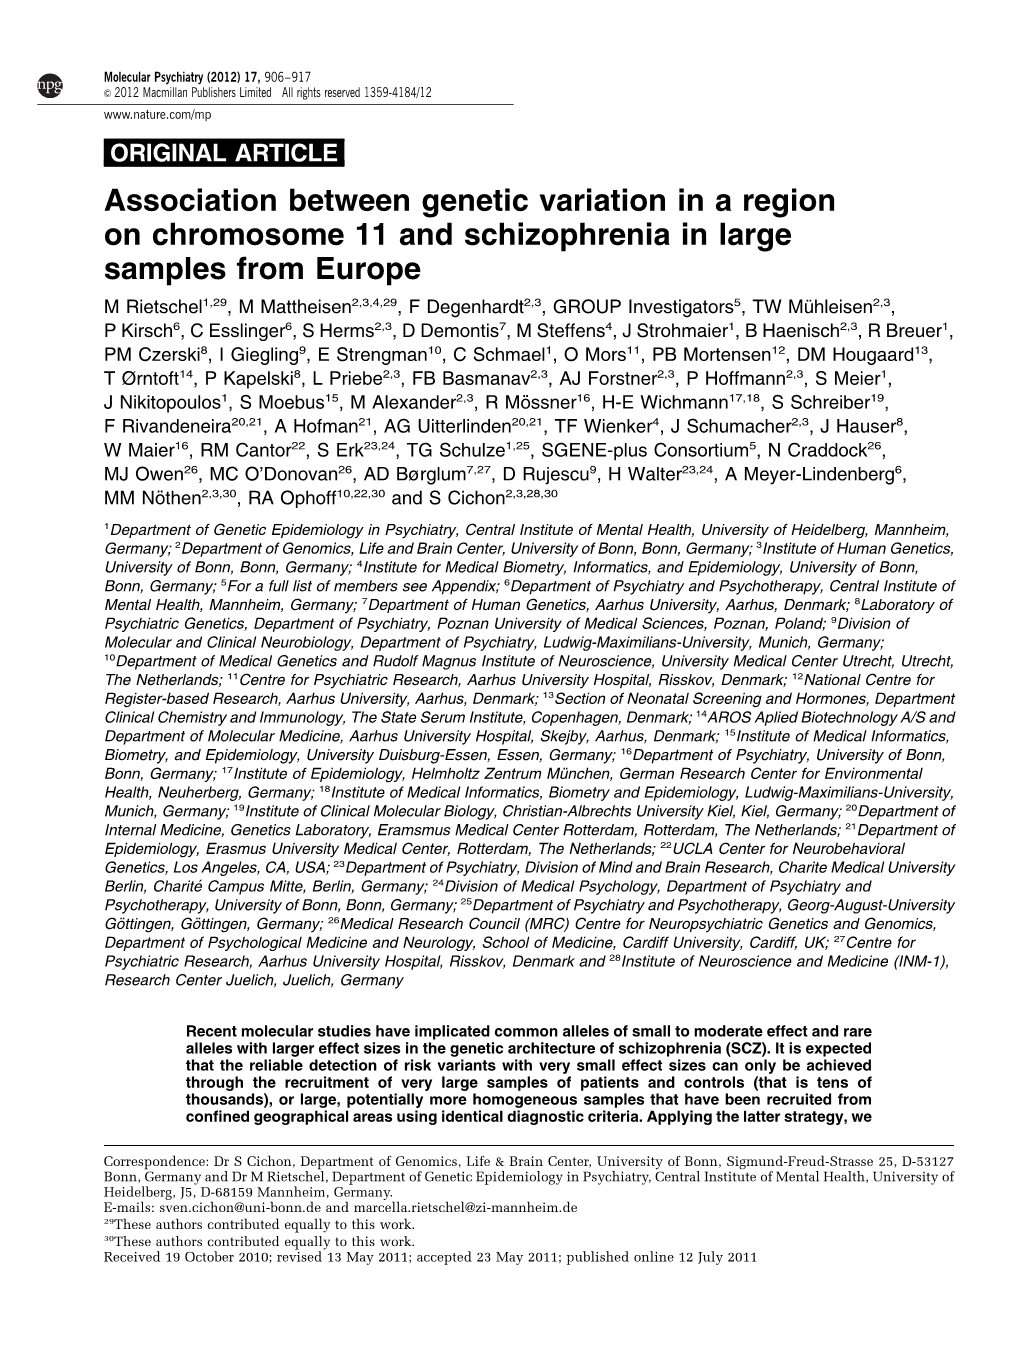 Association Between Genetic Variation in a Region on Chromosome 11 And